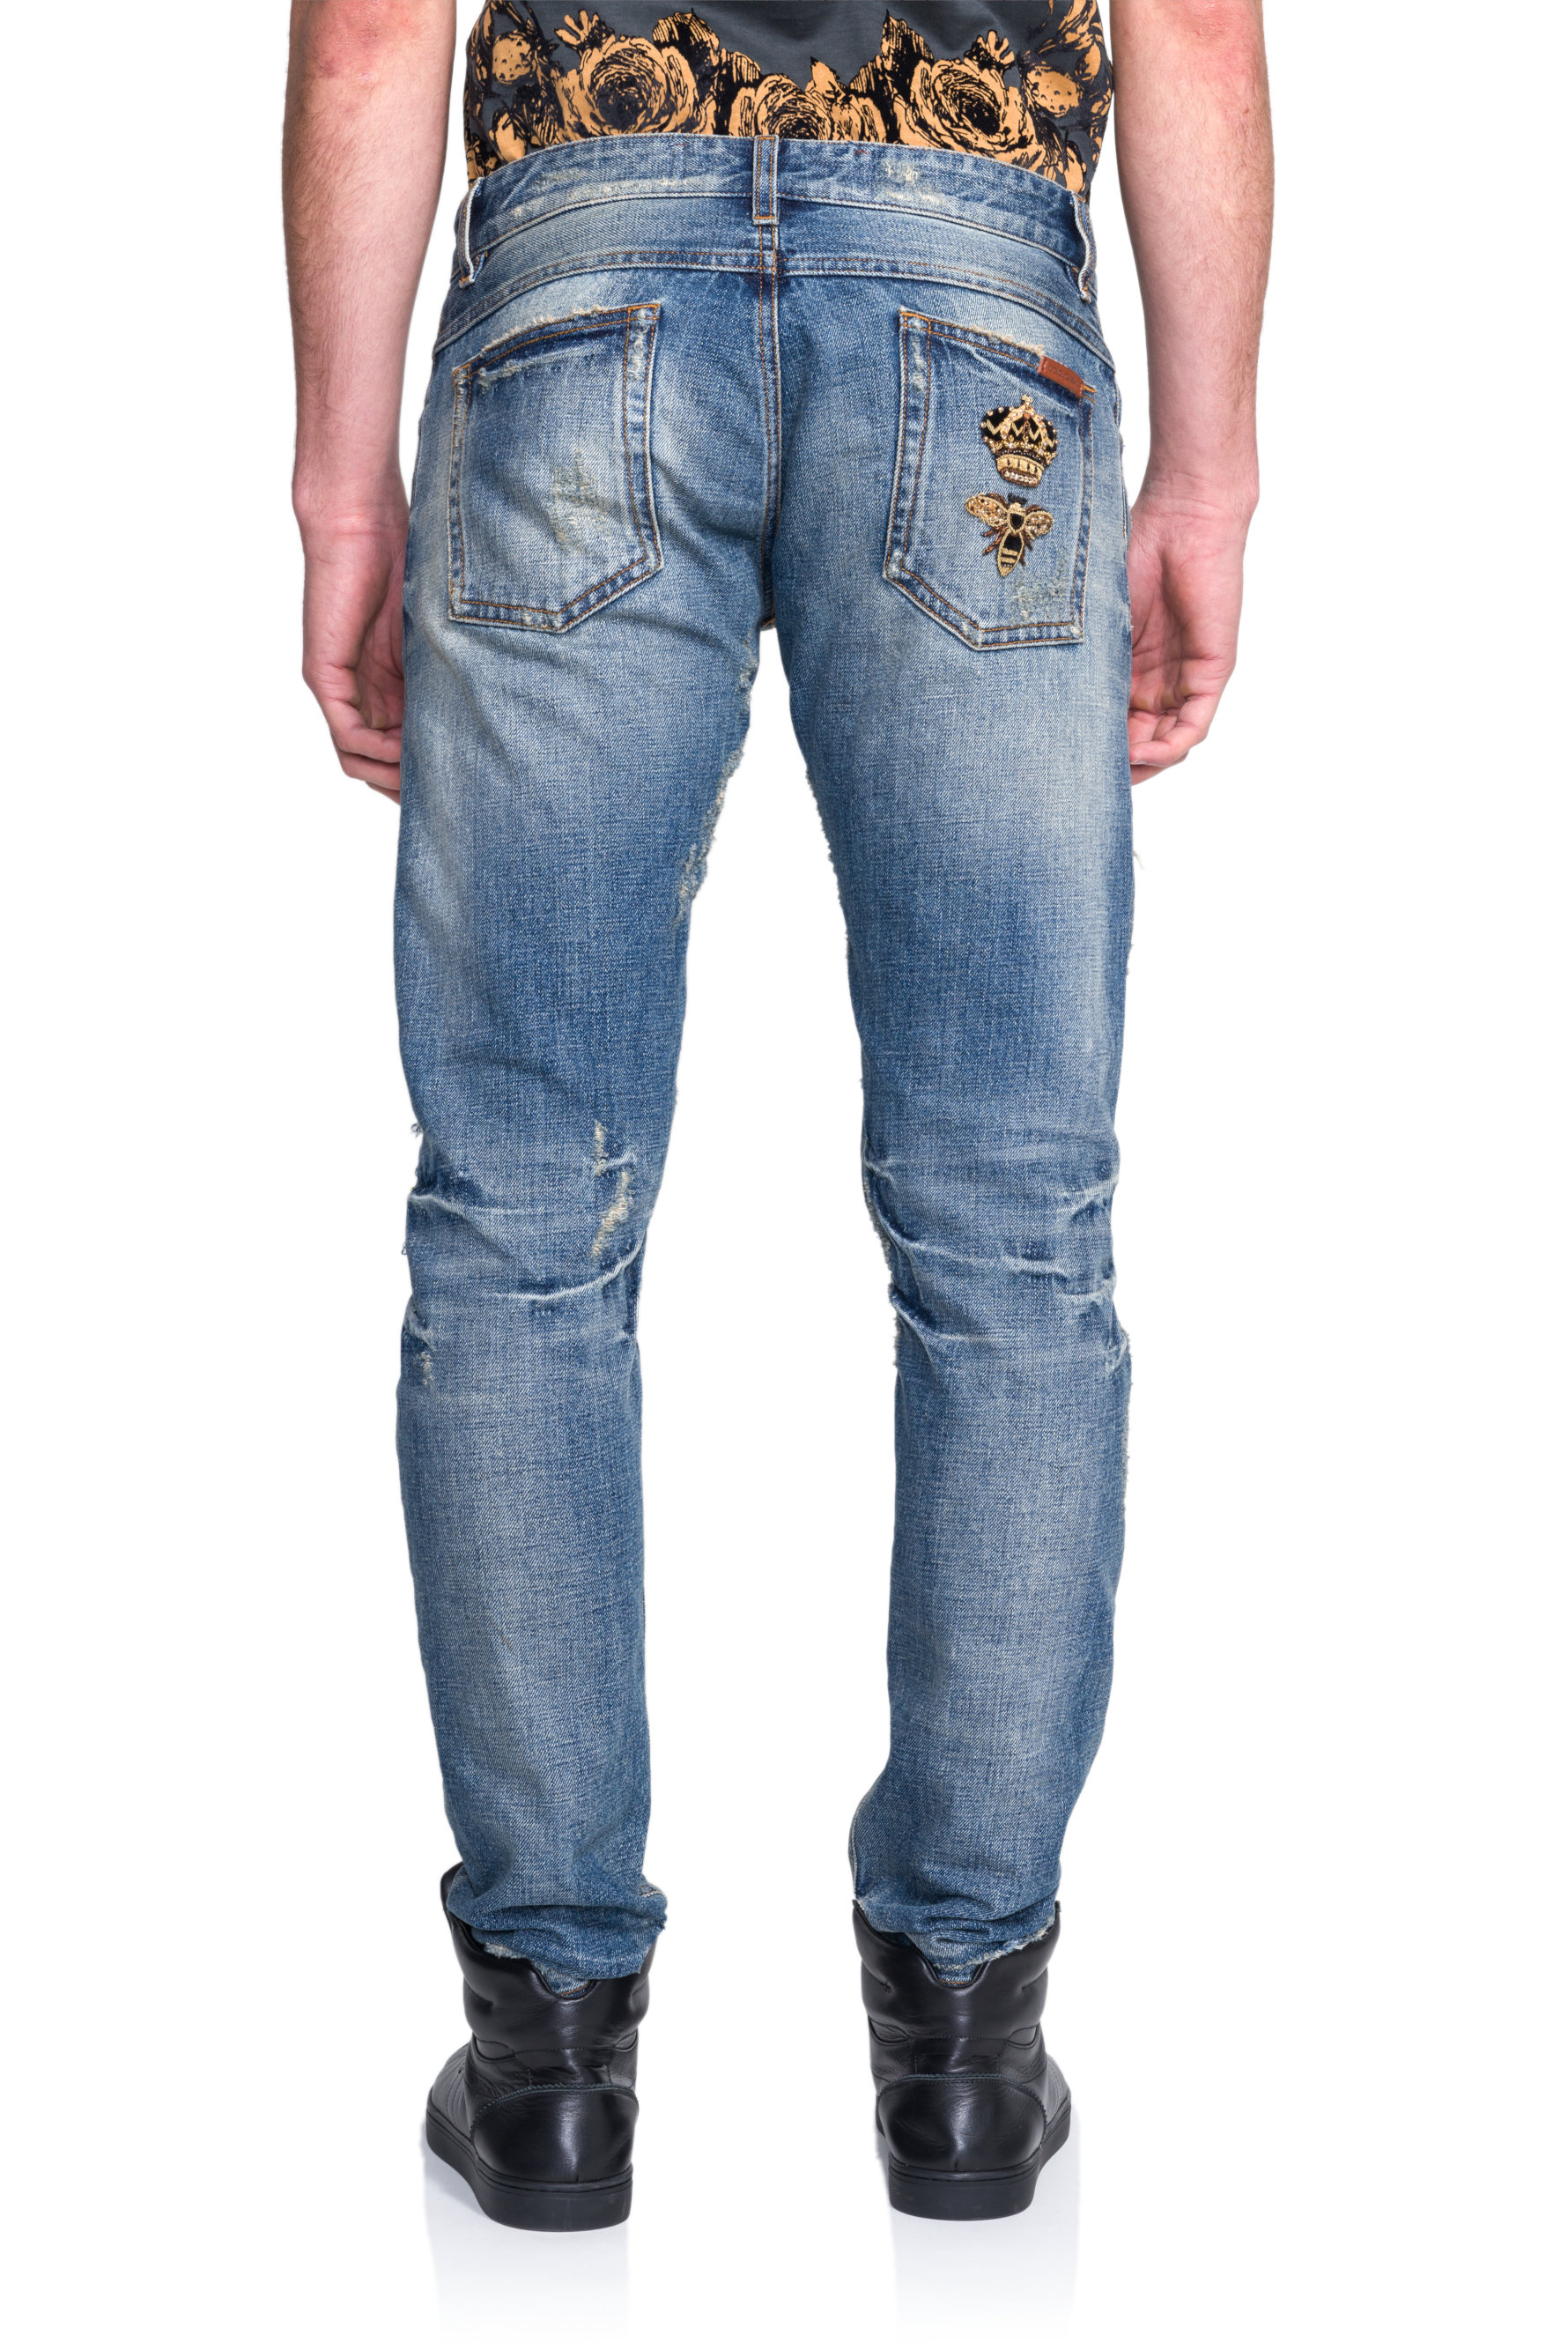 Lyst - Dolce & Gabbana Distressed Crown Patch Denim Jeans in Blue for Men